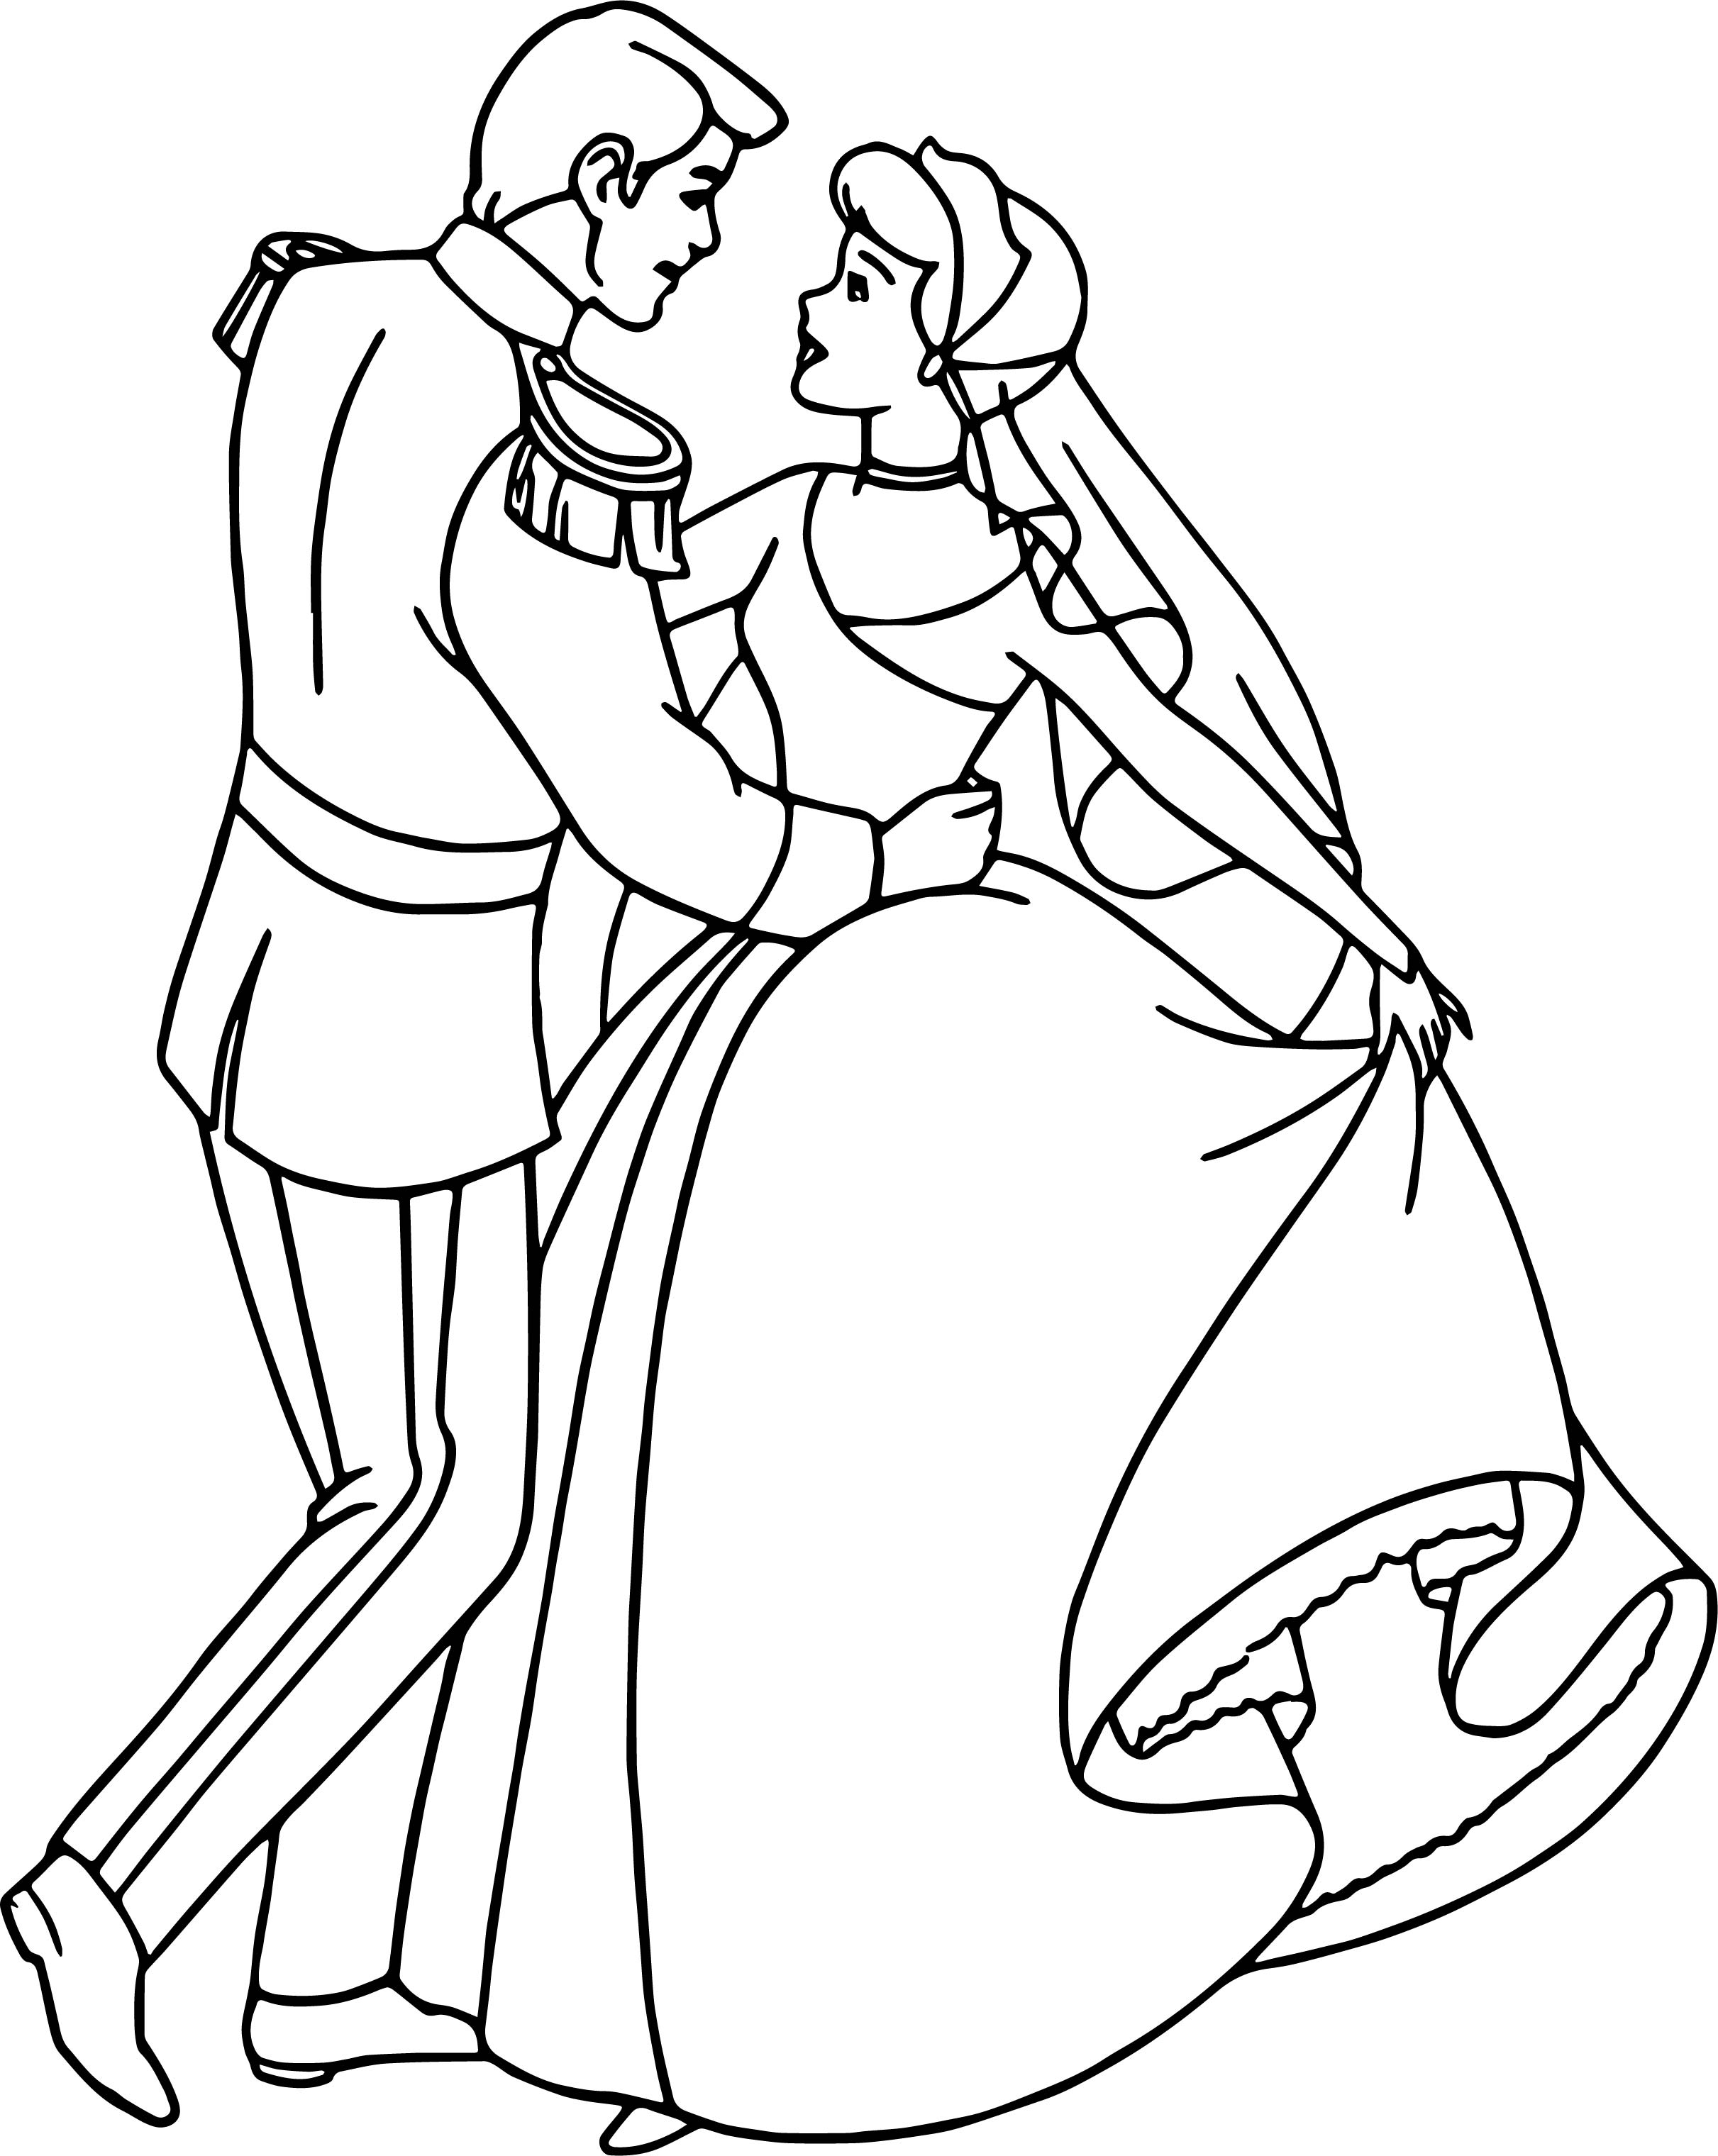 Dancing Coloring Page Coloring Splendi Danceg Sheets Photo Inspirations Pages For Kids